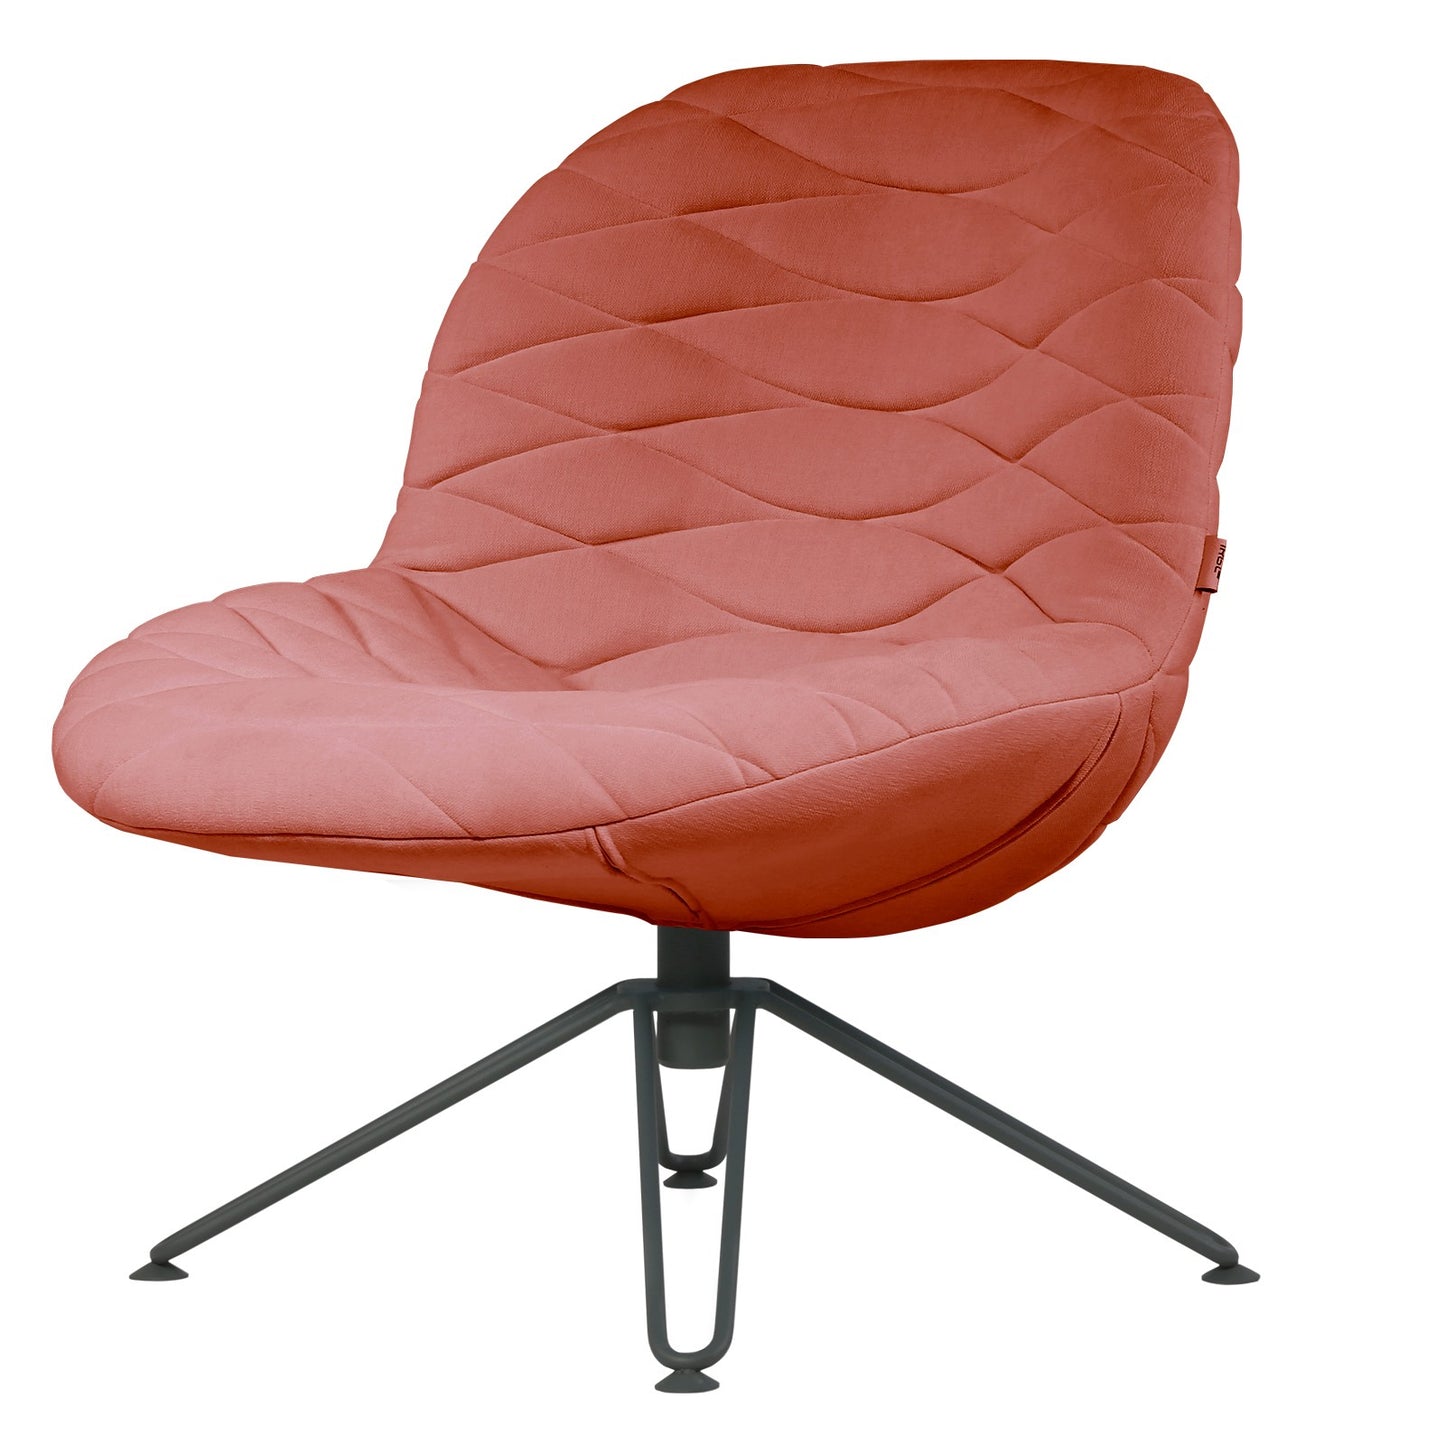 Lounge chair Mannequin Lounge 03 - Coral